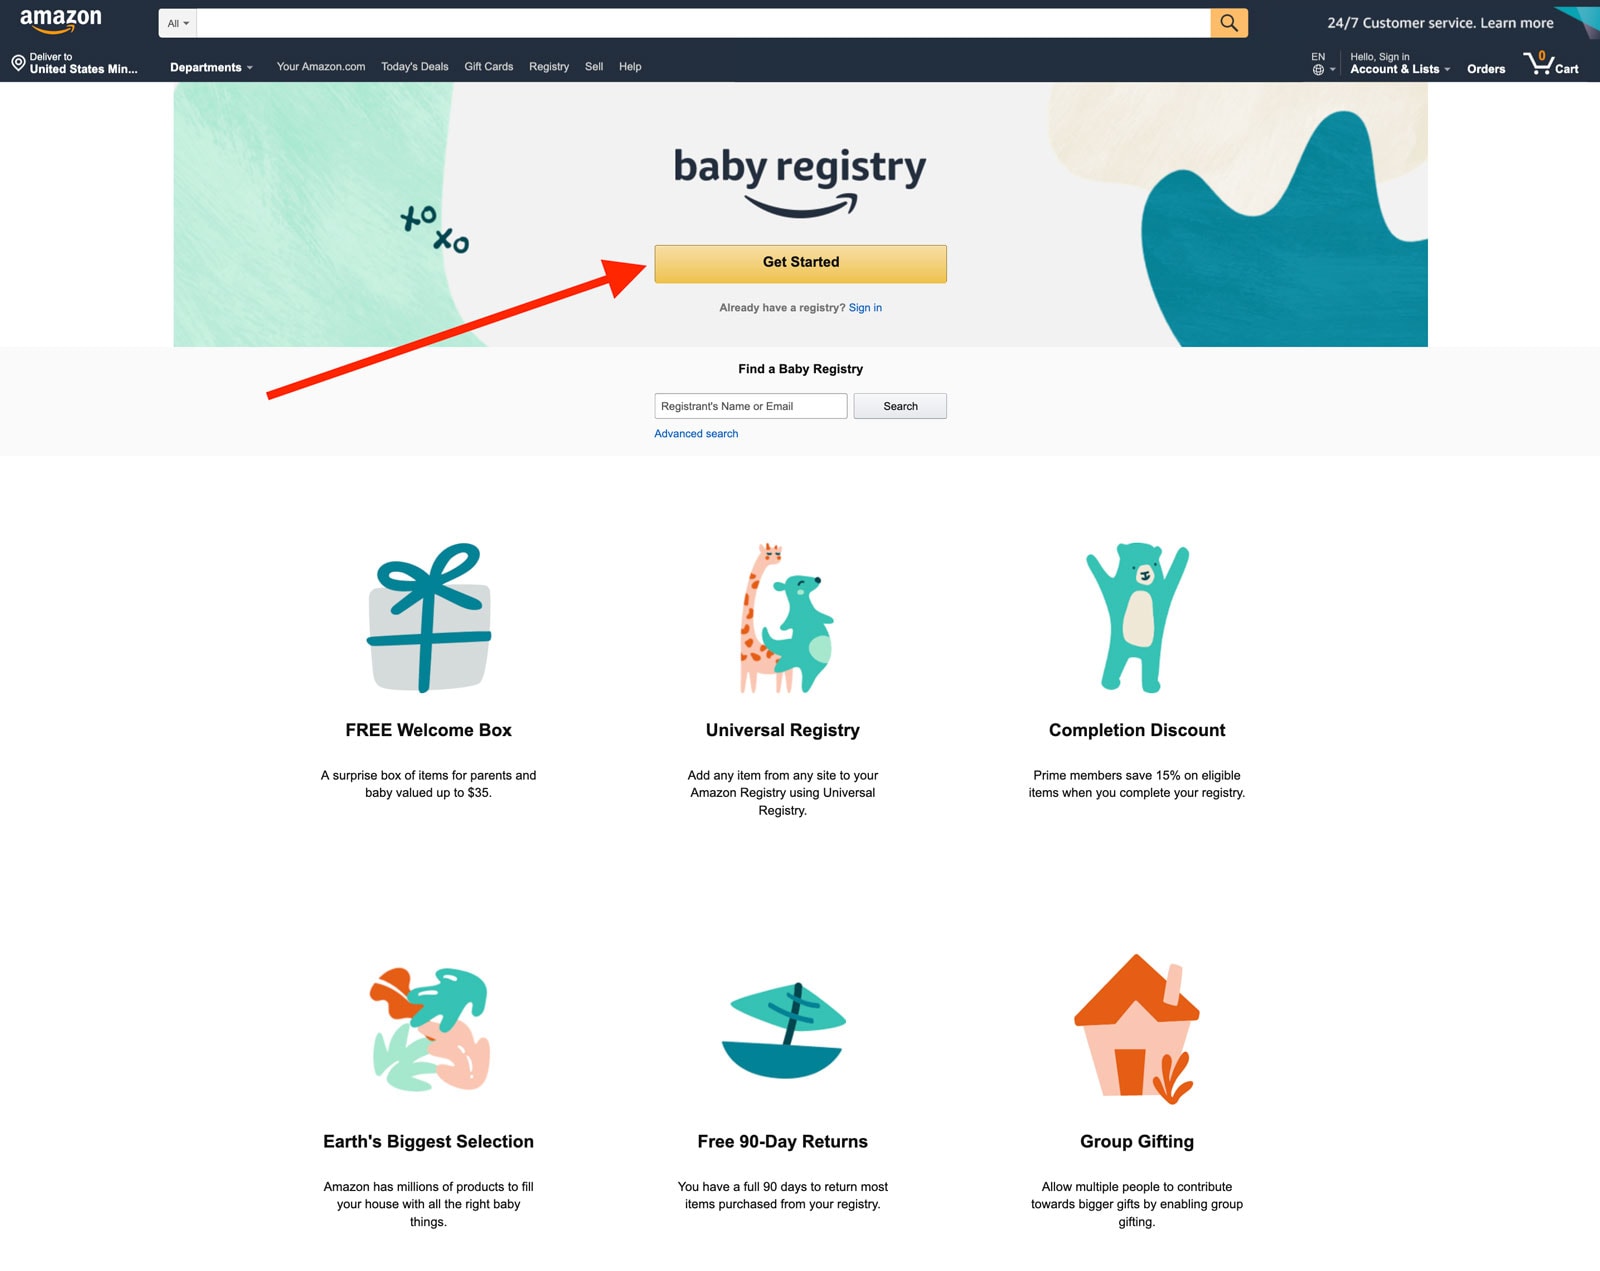 Amazon Baby Registry Tips: A Step-by-Step Guide